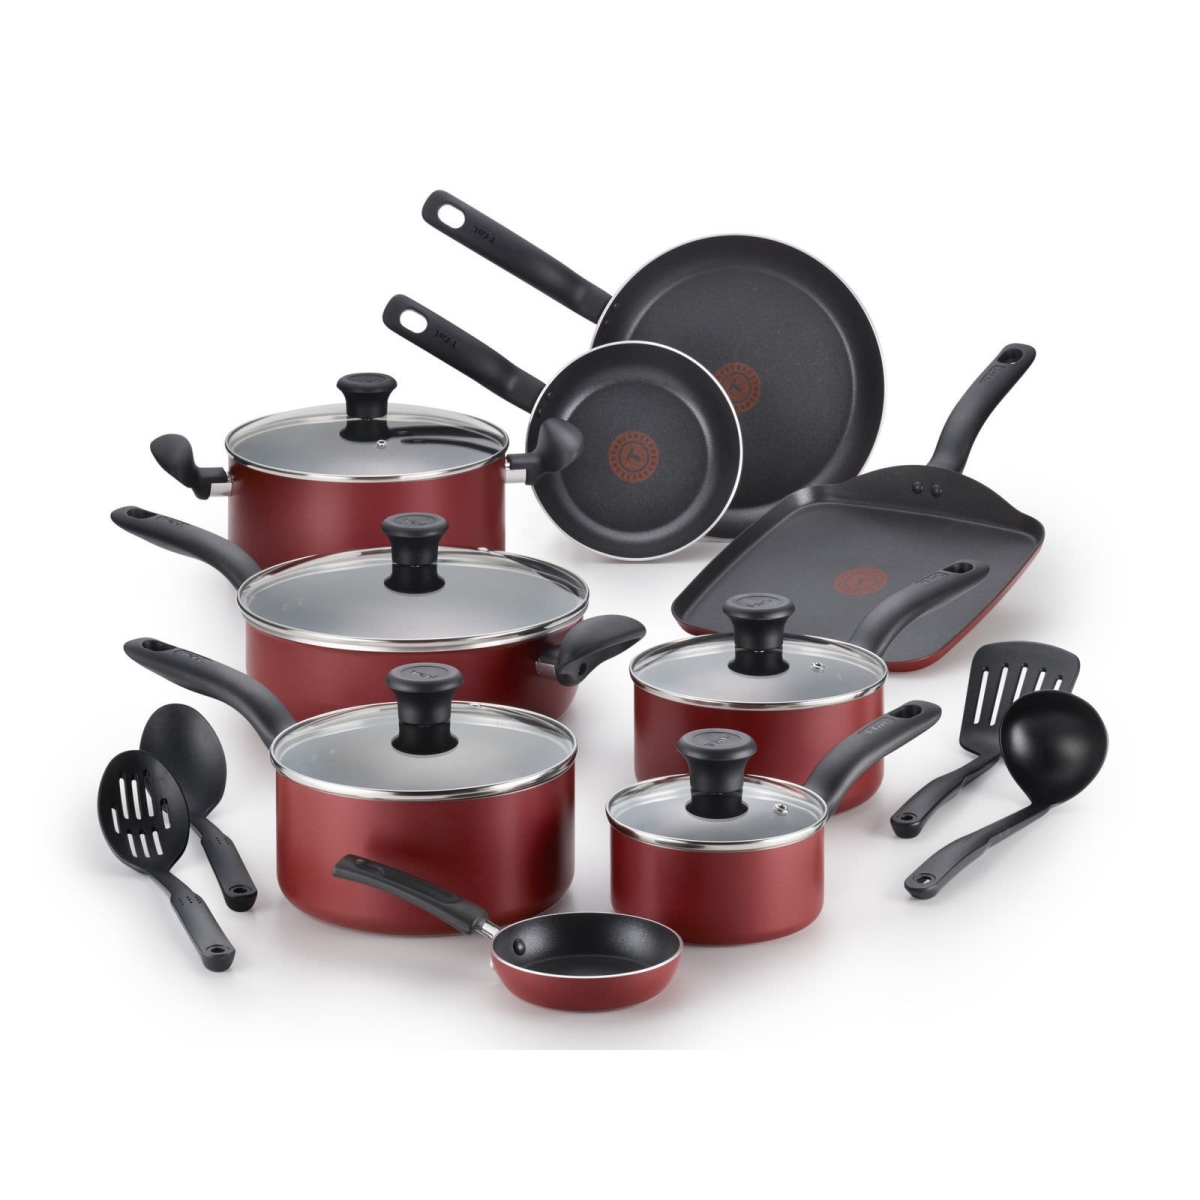 T-fal B209si64 Initiatives Nonstick Cookware Set, Red - 18 Piece